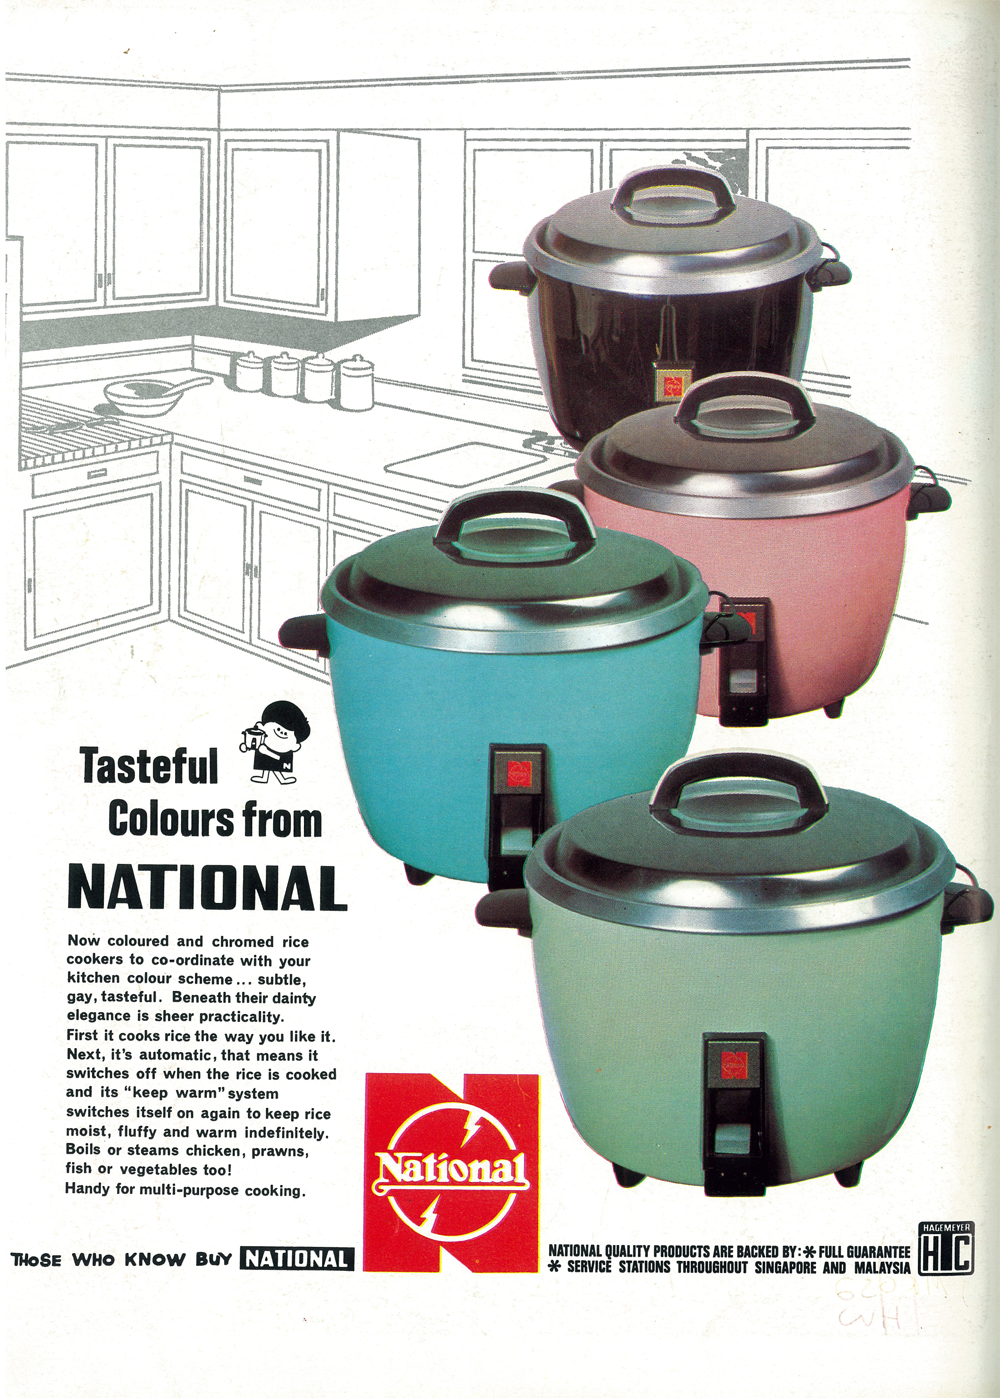 https://advertisingarchive.asia/wp-content/uploads/1960/08/National-Rice-Cooker-1967.png